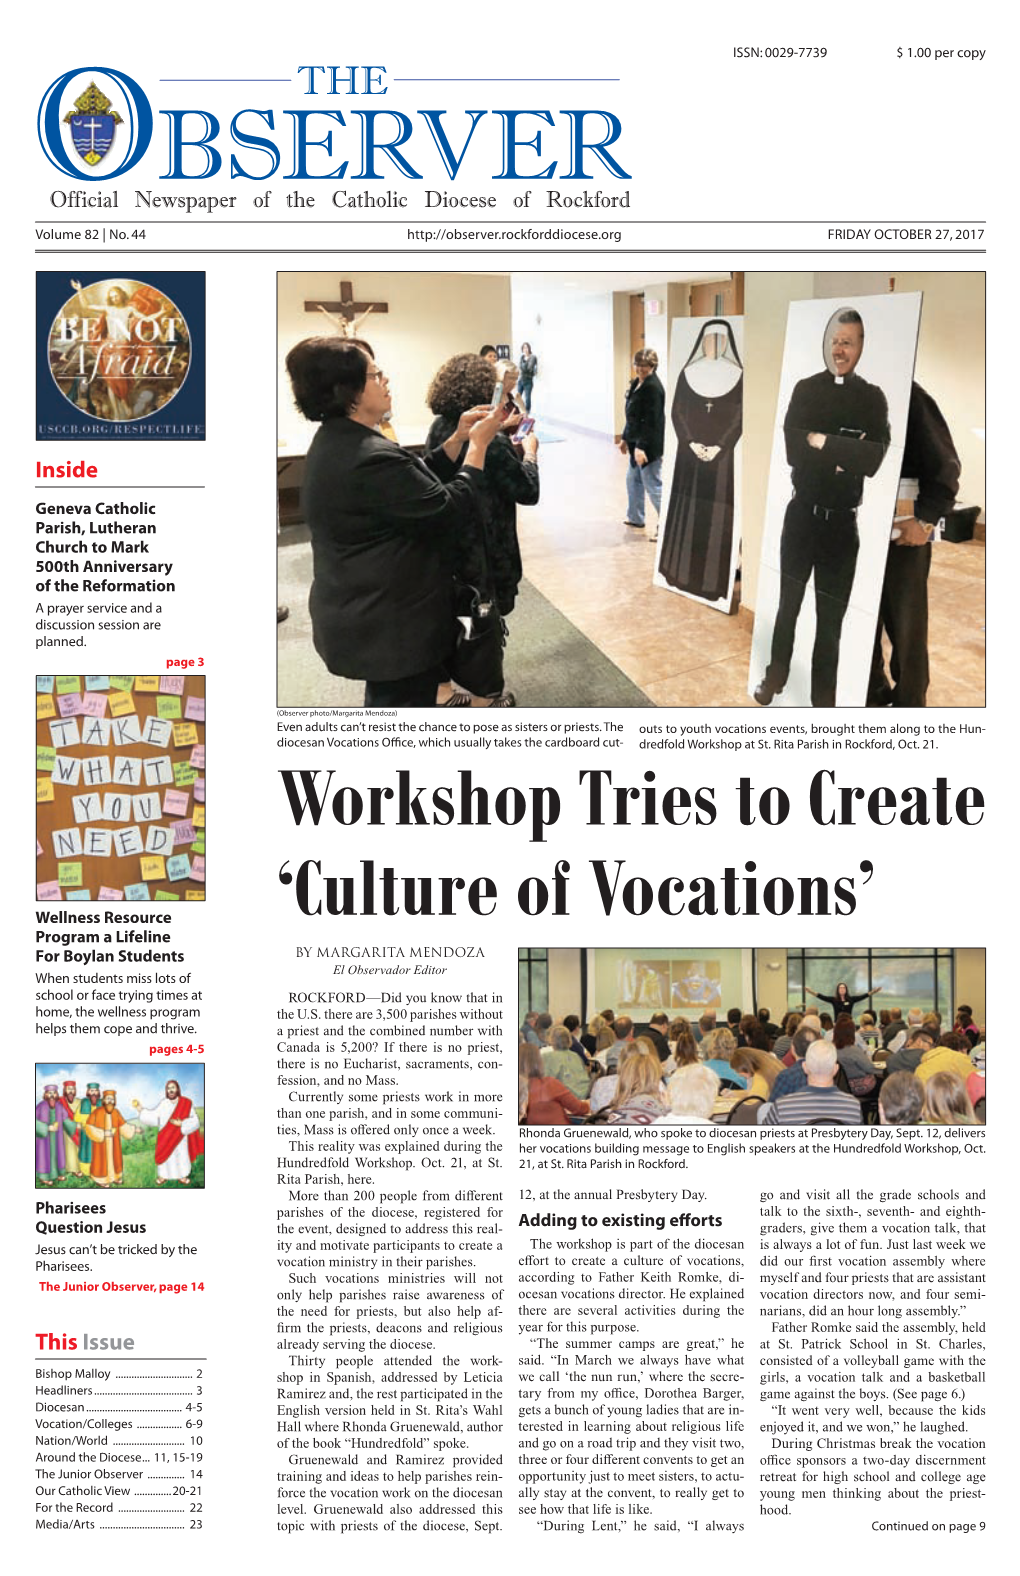 Workshop Tries to Create 'Culture of Vocations'